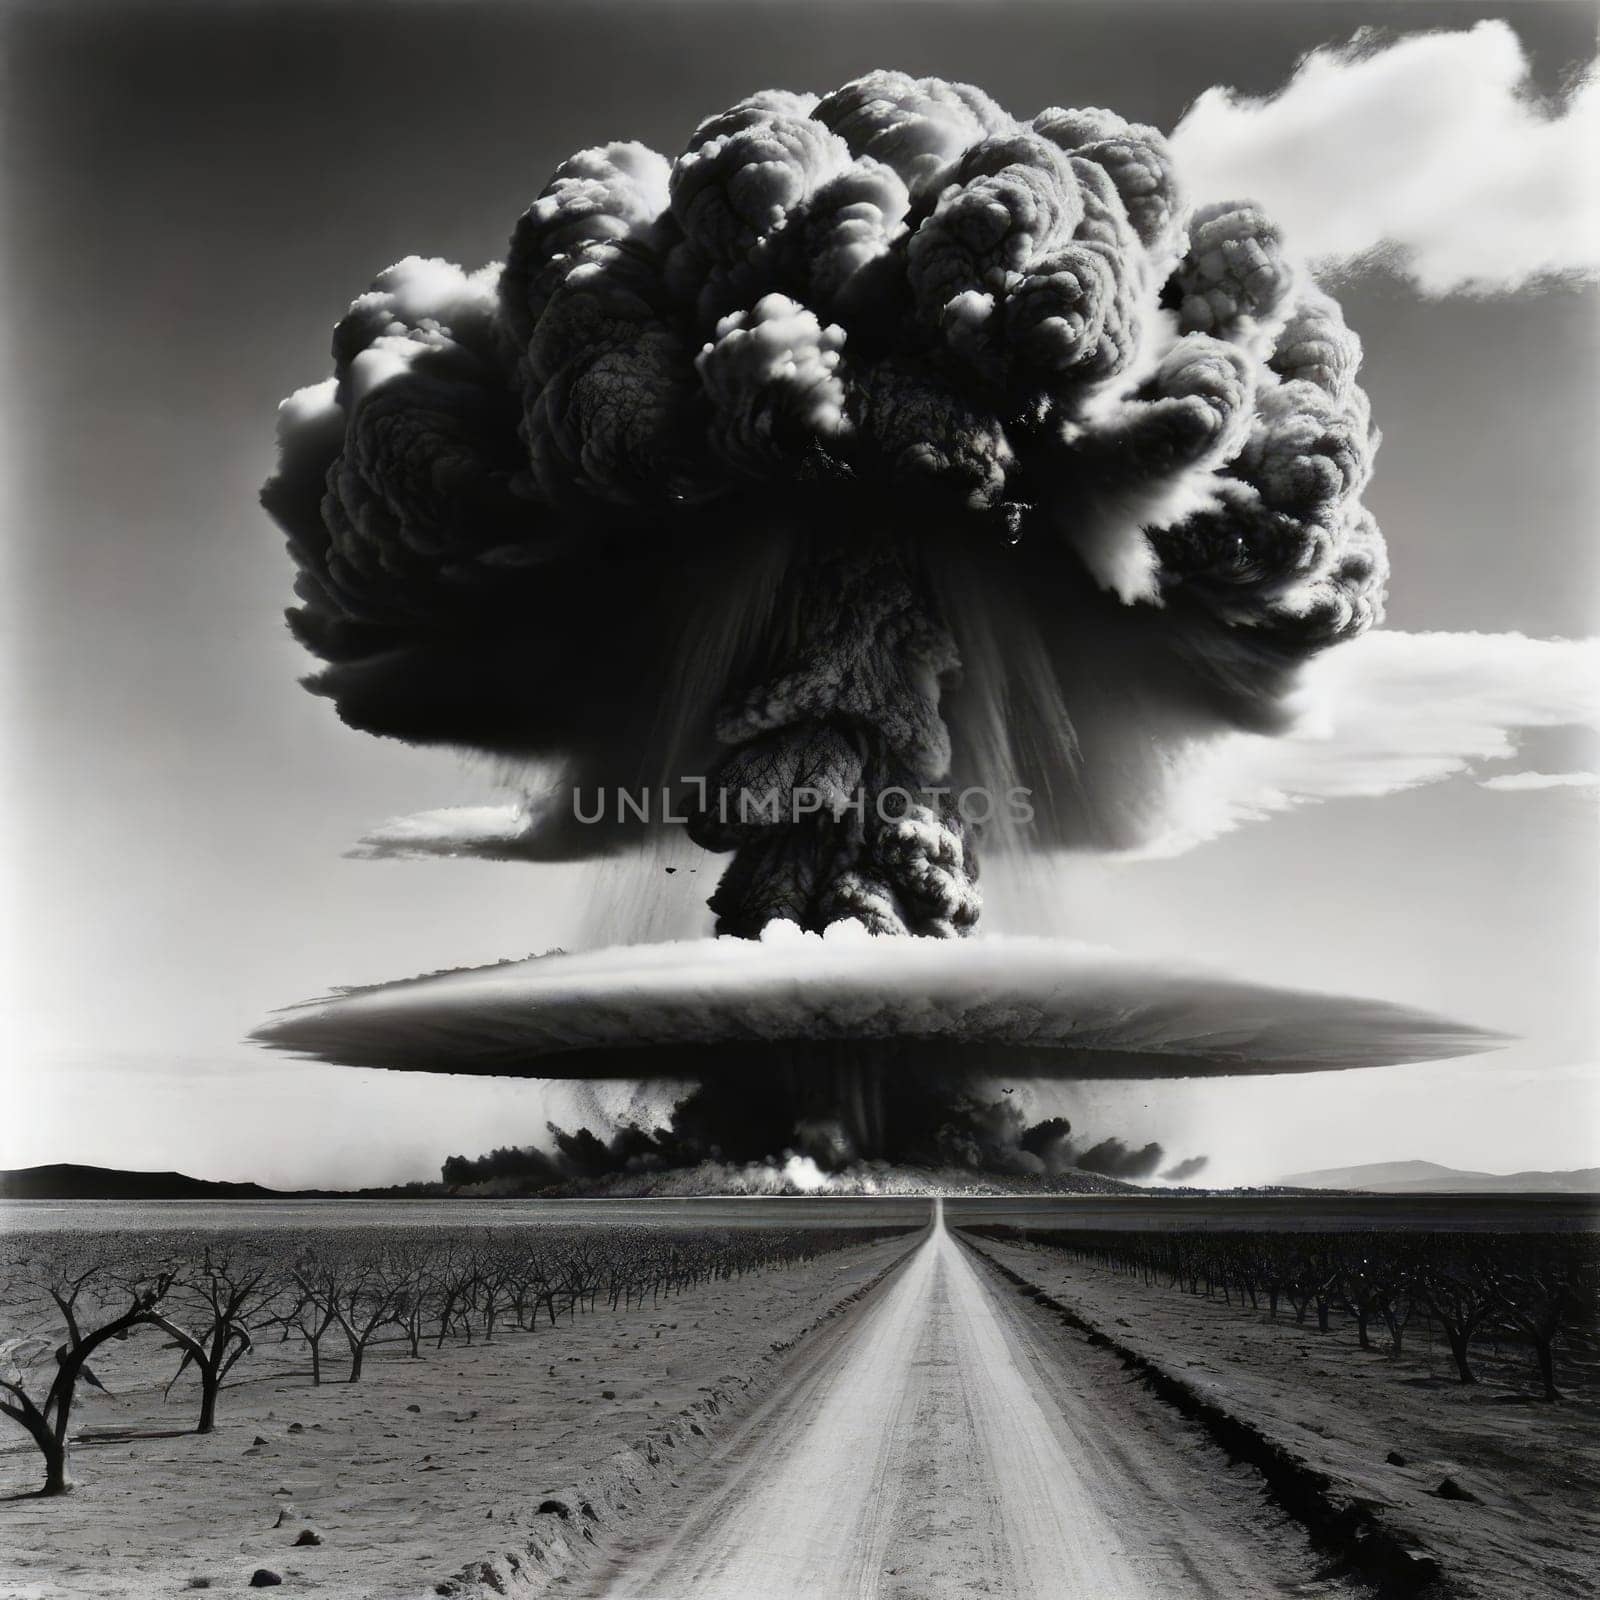 A photograph of a nuclear explosion against the backdrop of destroyed buildings and vacant lots and people. Military combat operations. Nuclear mushroom. Weapons of mass destruction.